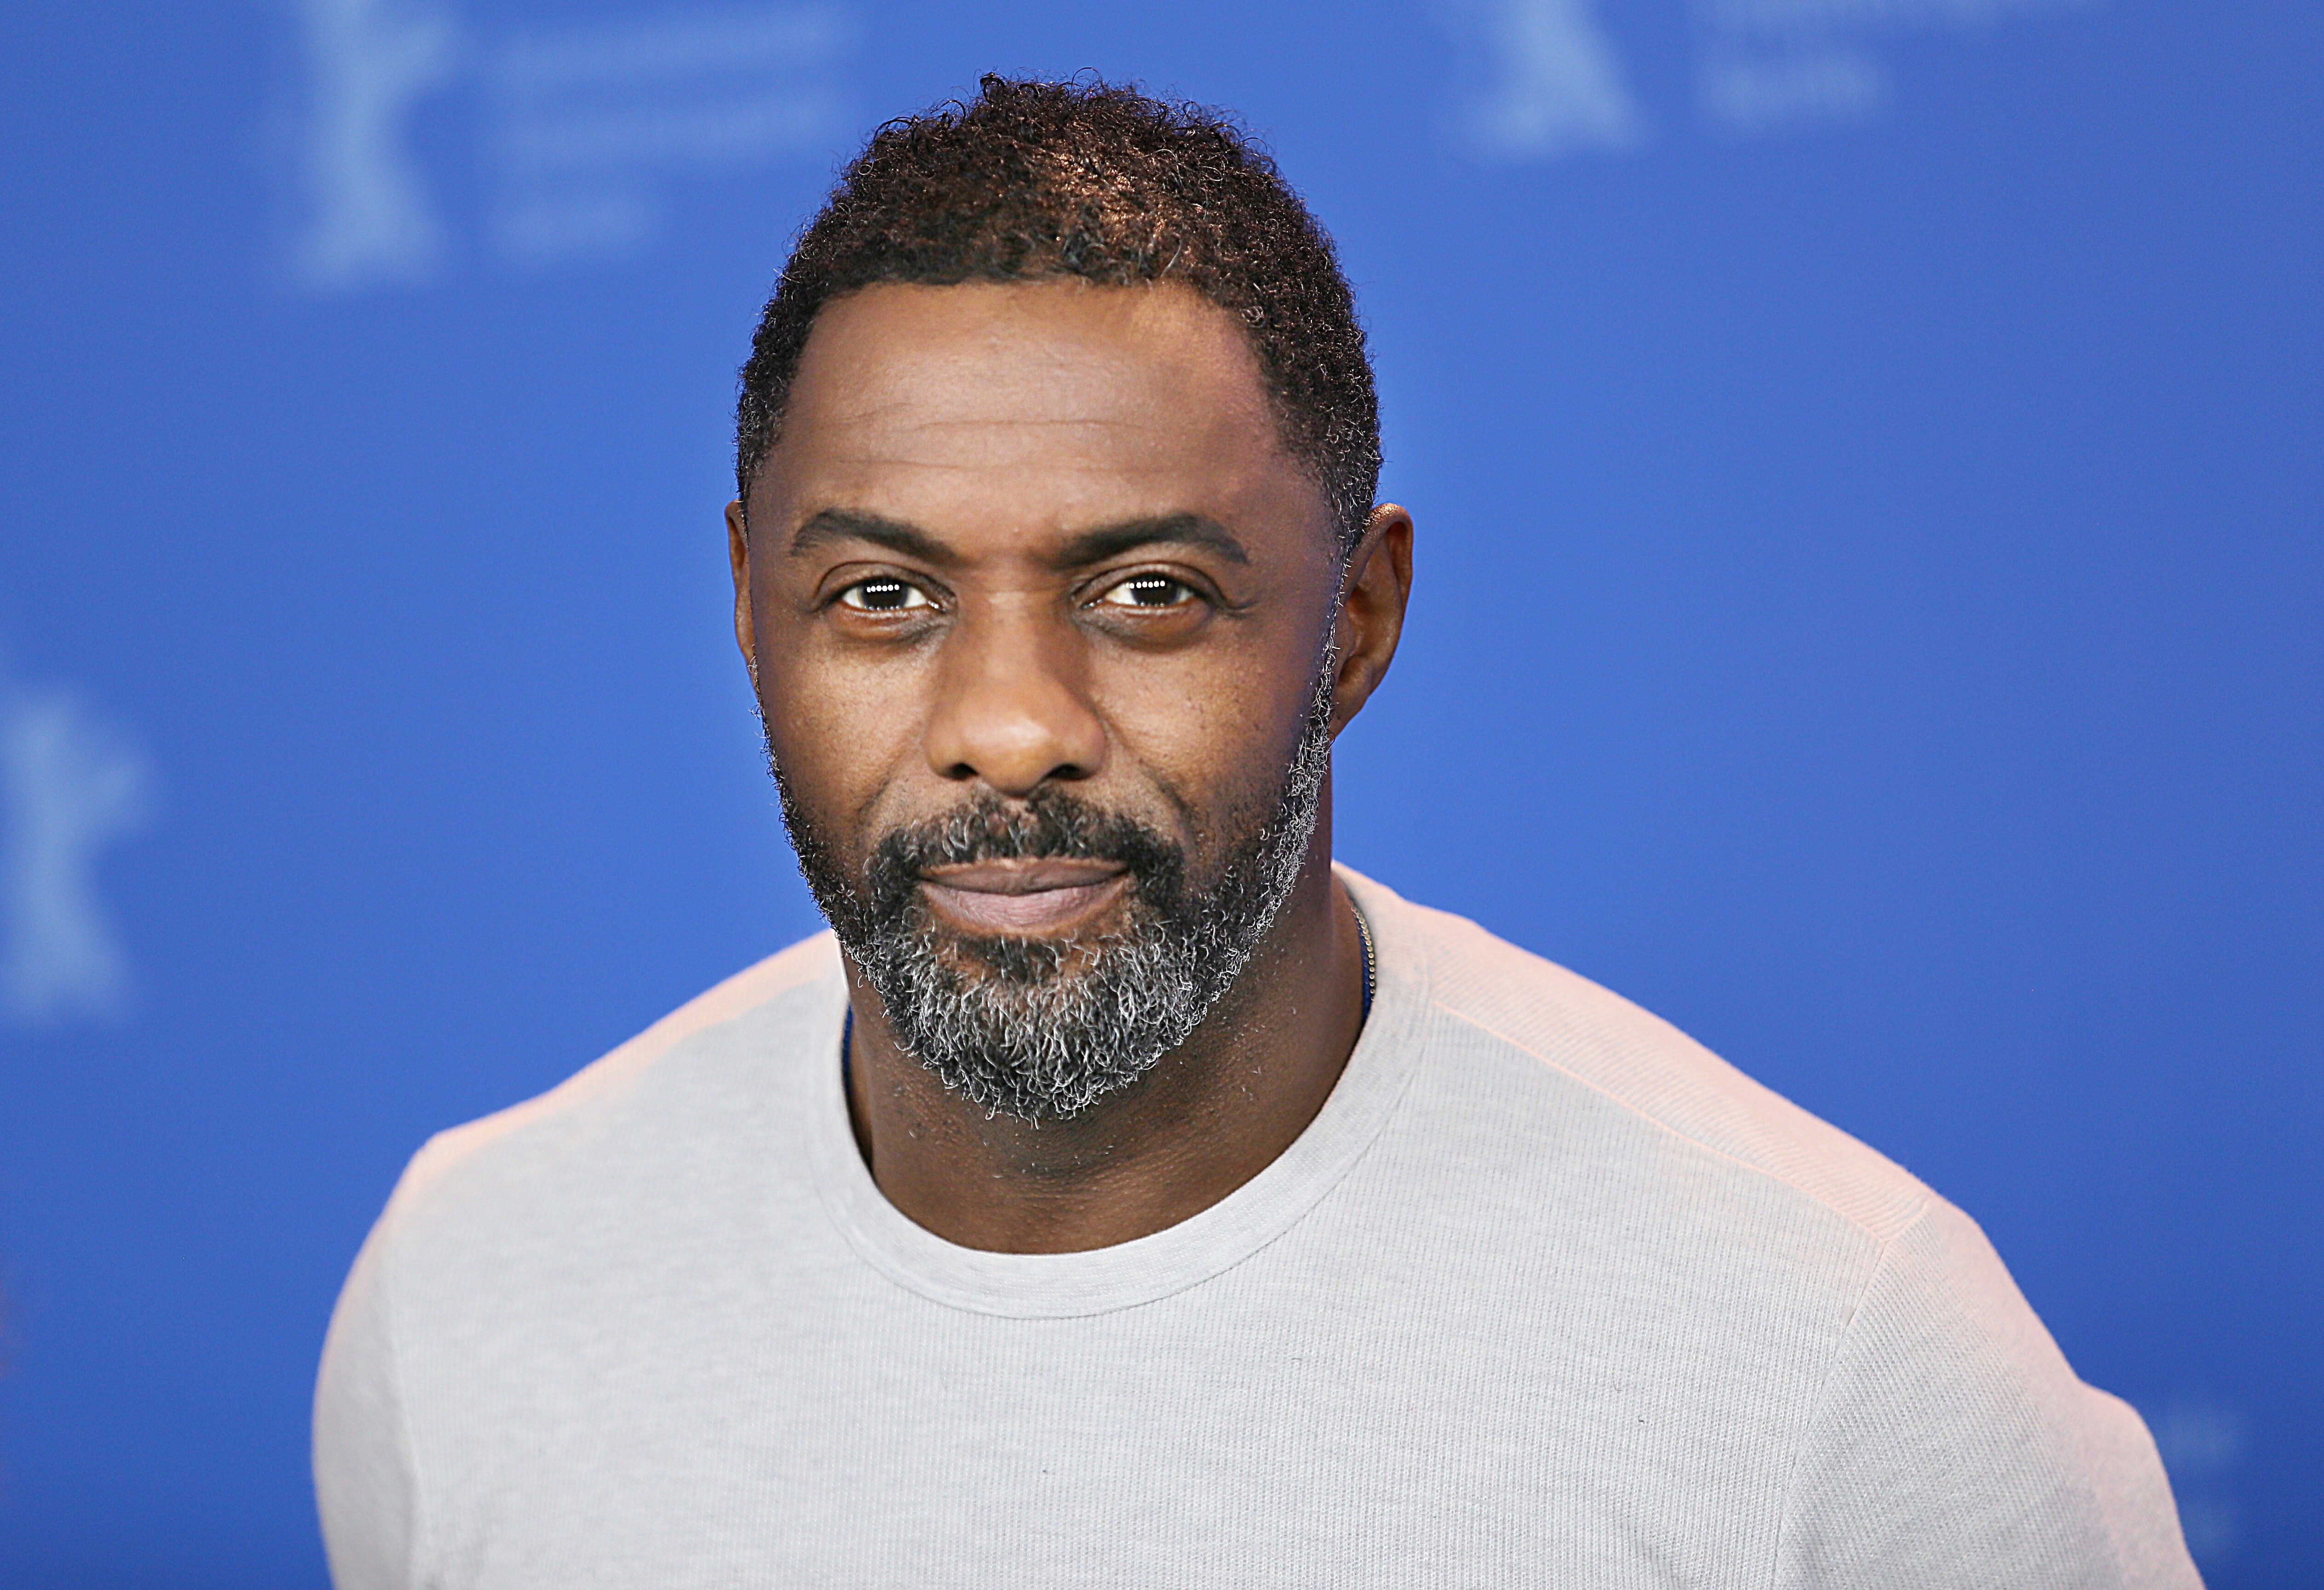 Idris Elba during the 68th Berlinale International Film Festival Berlin in Berlin, Germany. Like Stanley Tucci, he is considered to be a zaddy. Photo: Shutterstock